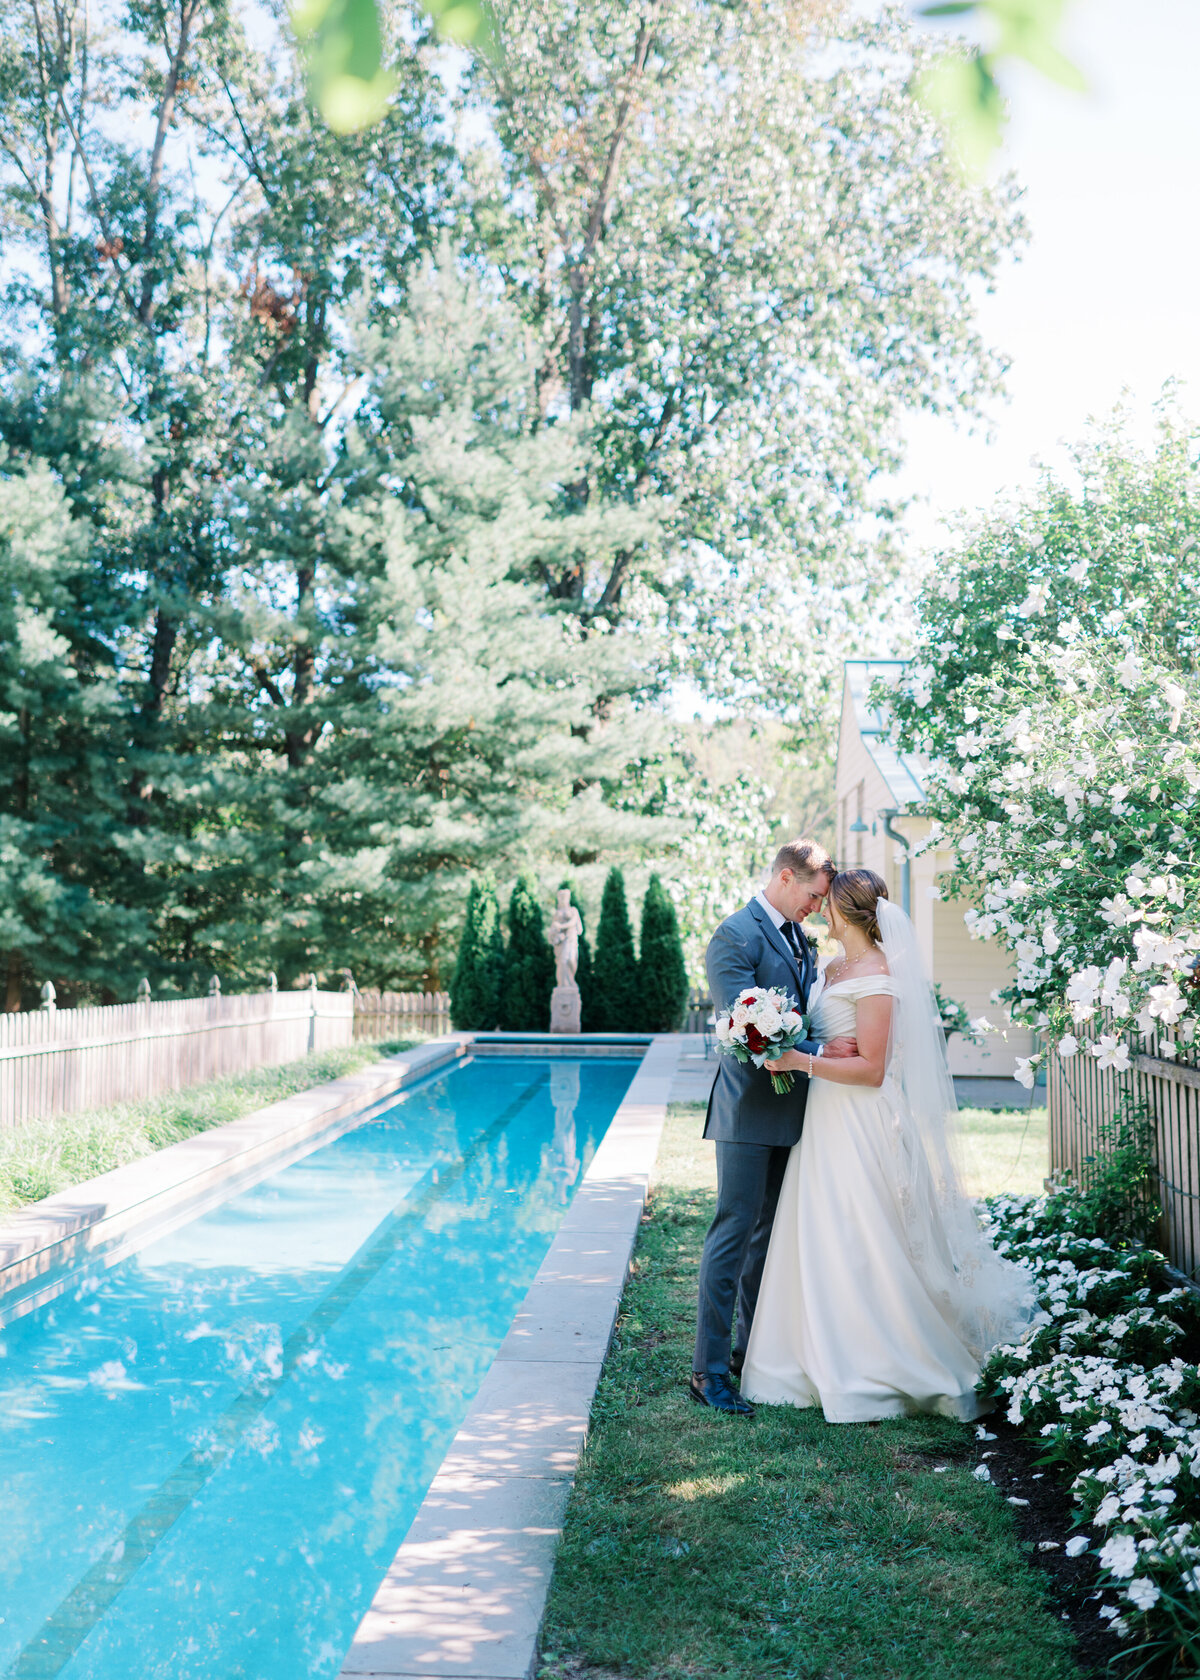 Bride and groom embrace near a pool